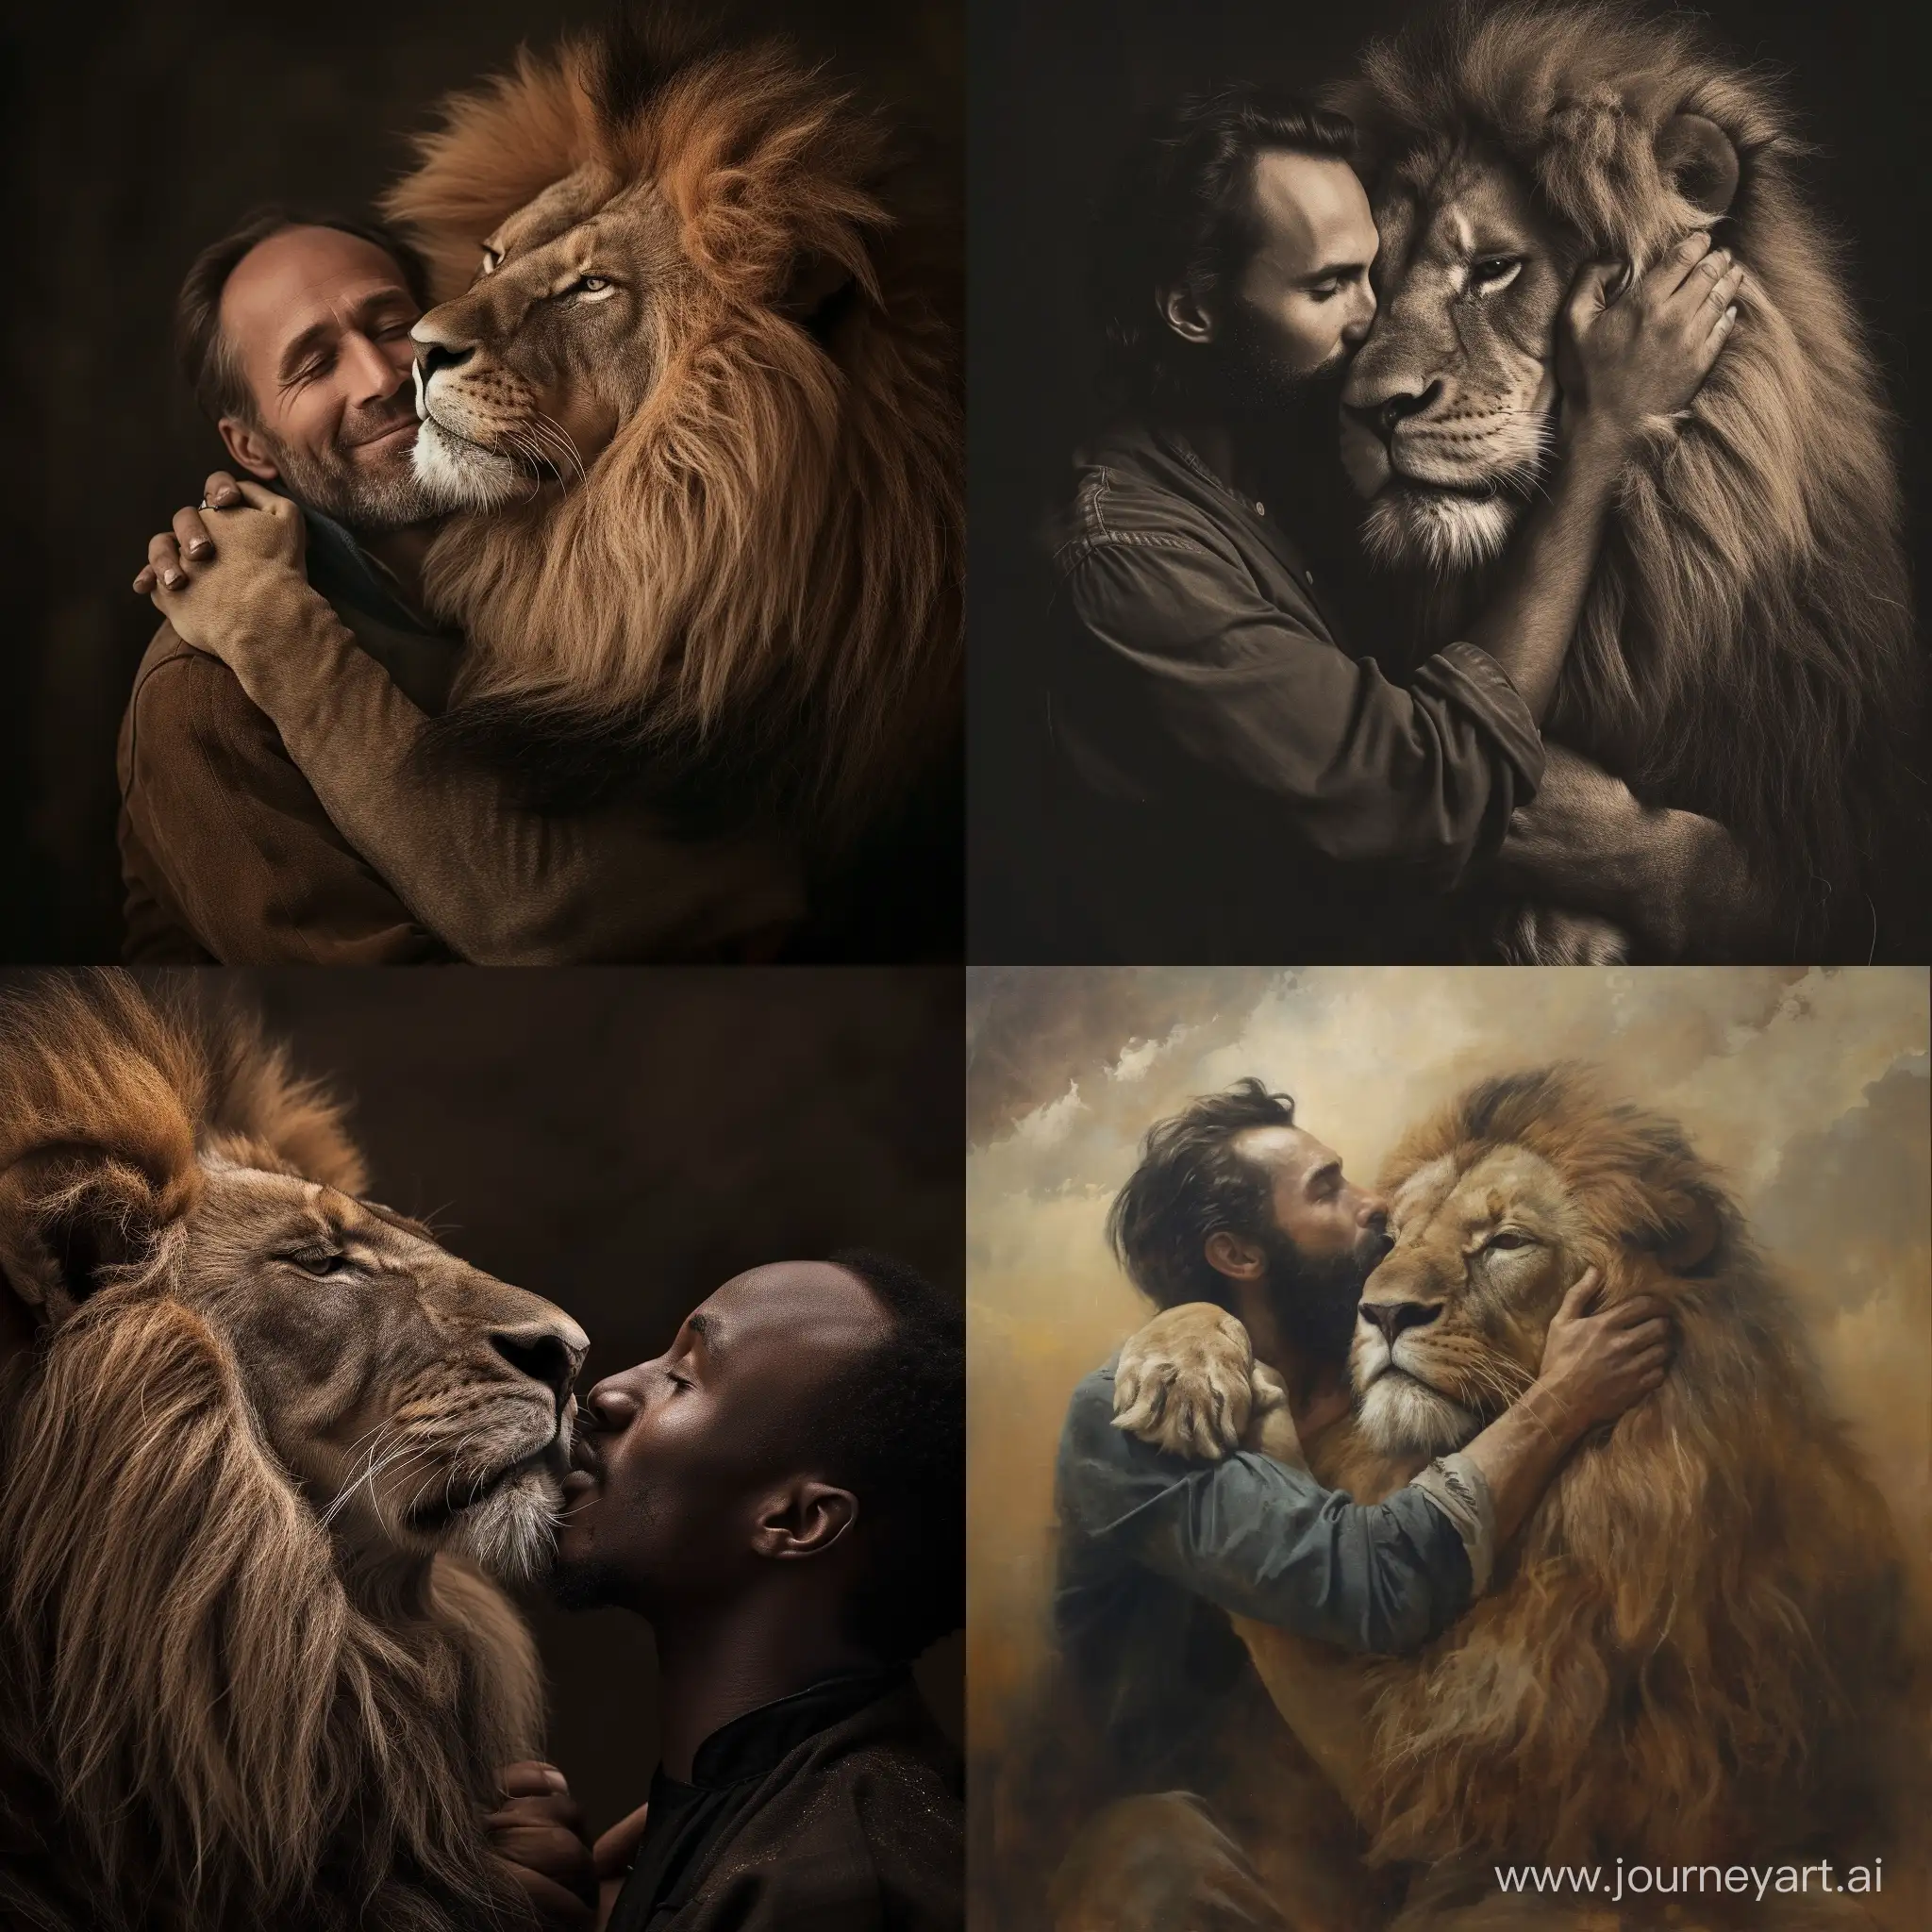 Harmonious-Bond-Between-Man-and-Majestic-Lion-in-a-Square-Composition